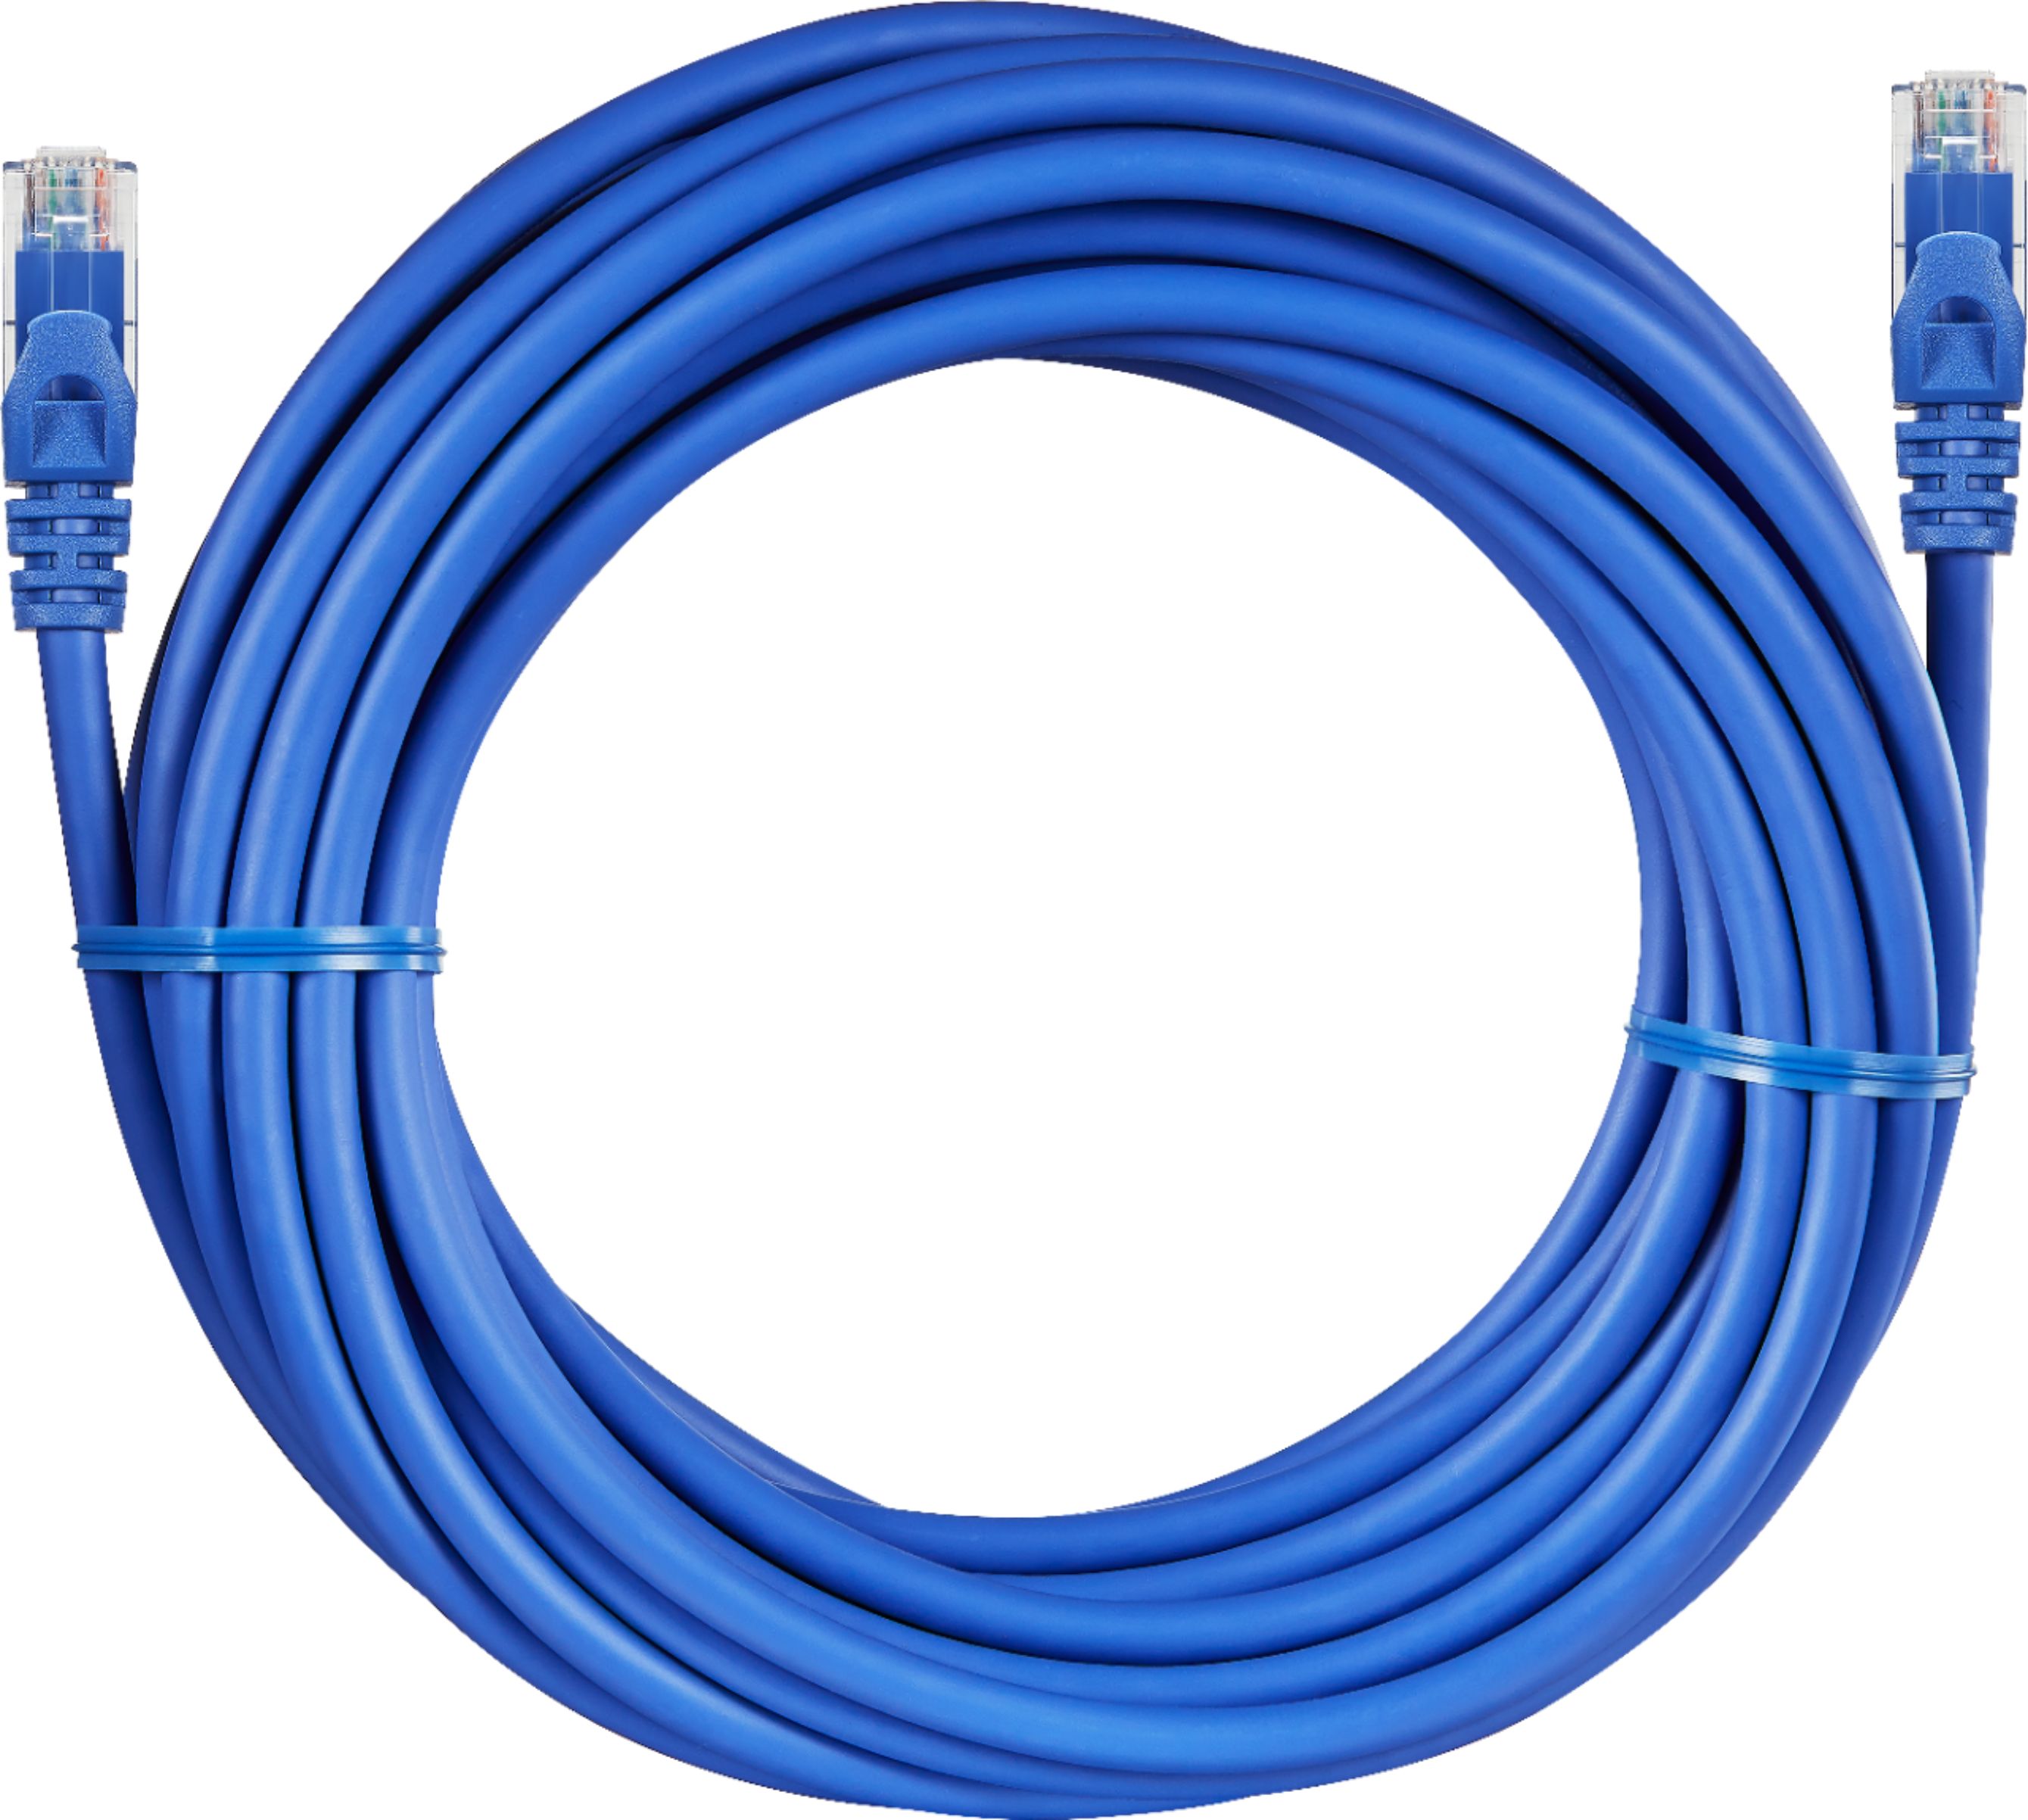 Bestbuy Essentials BE-PEC6ST100 100ft Cat-6 Blue Networking Cable - Open Box